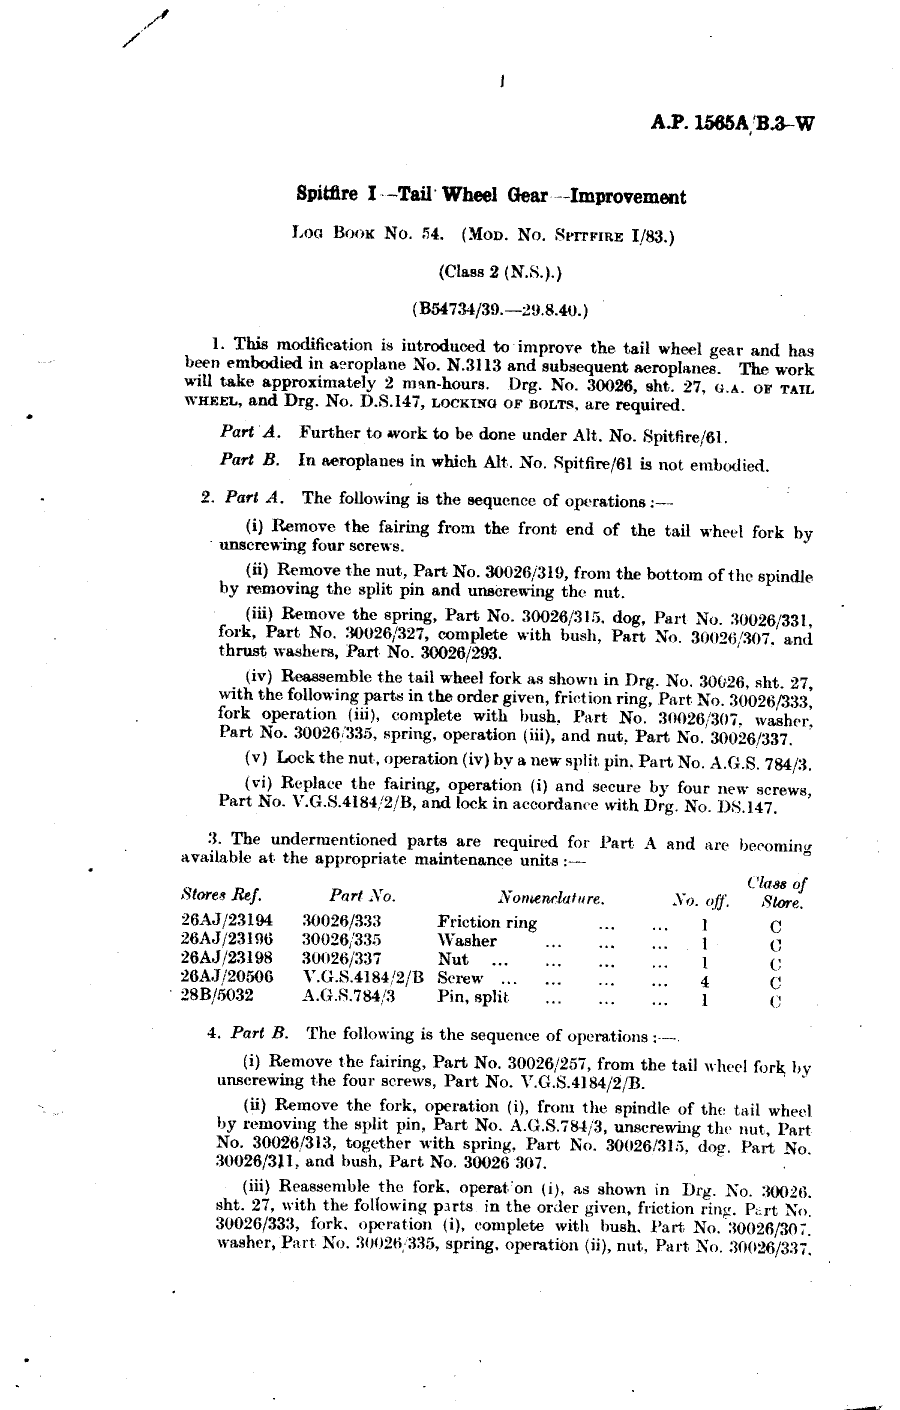 Sample page 1 from AirCorps Library document: Spitfire I Tail Wheel Gear Improvement